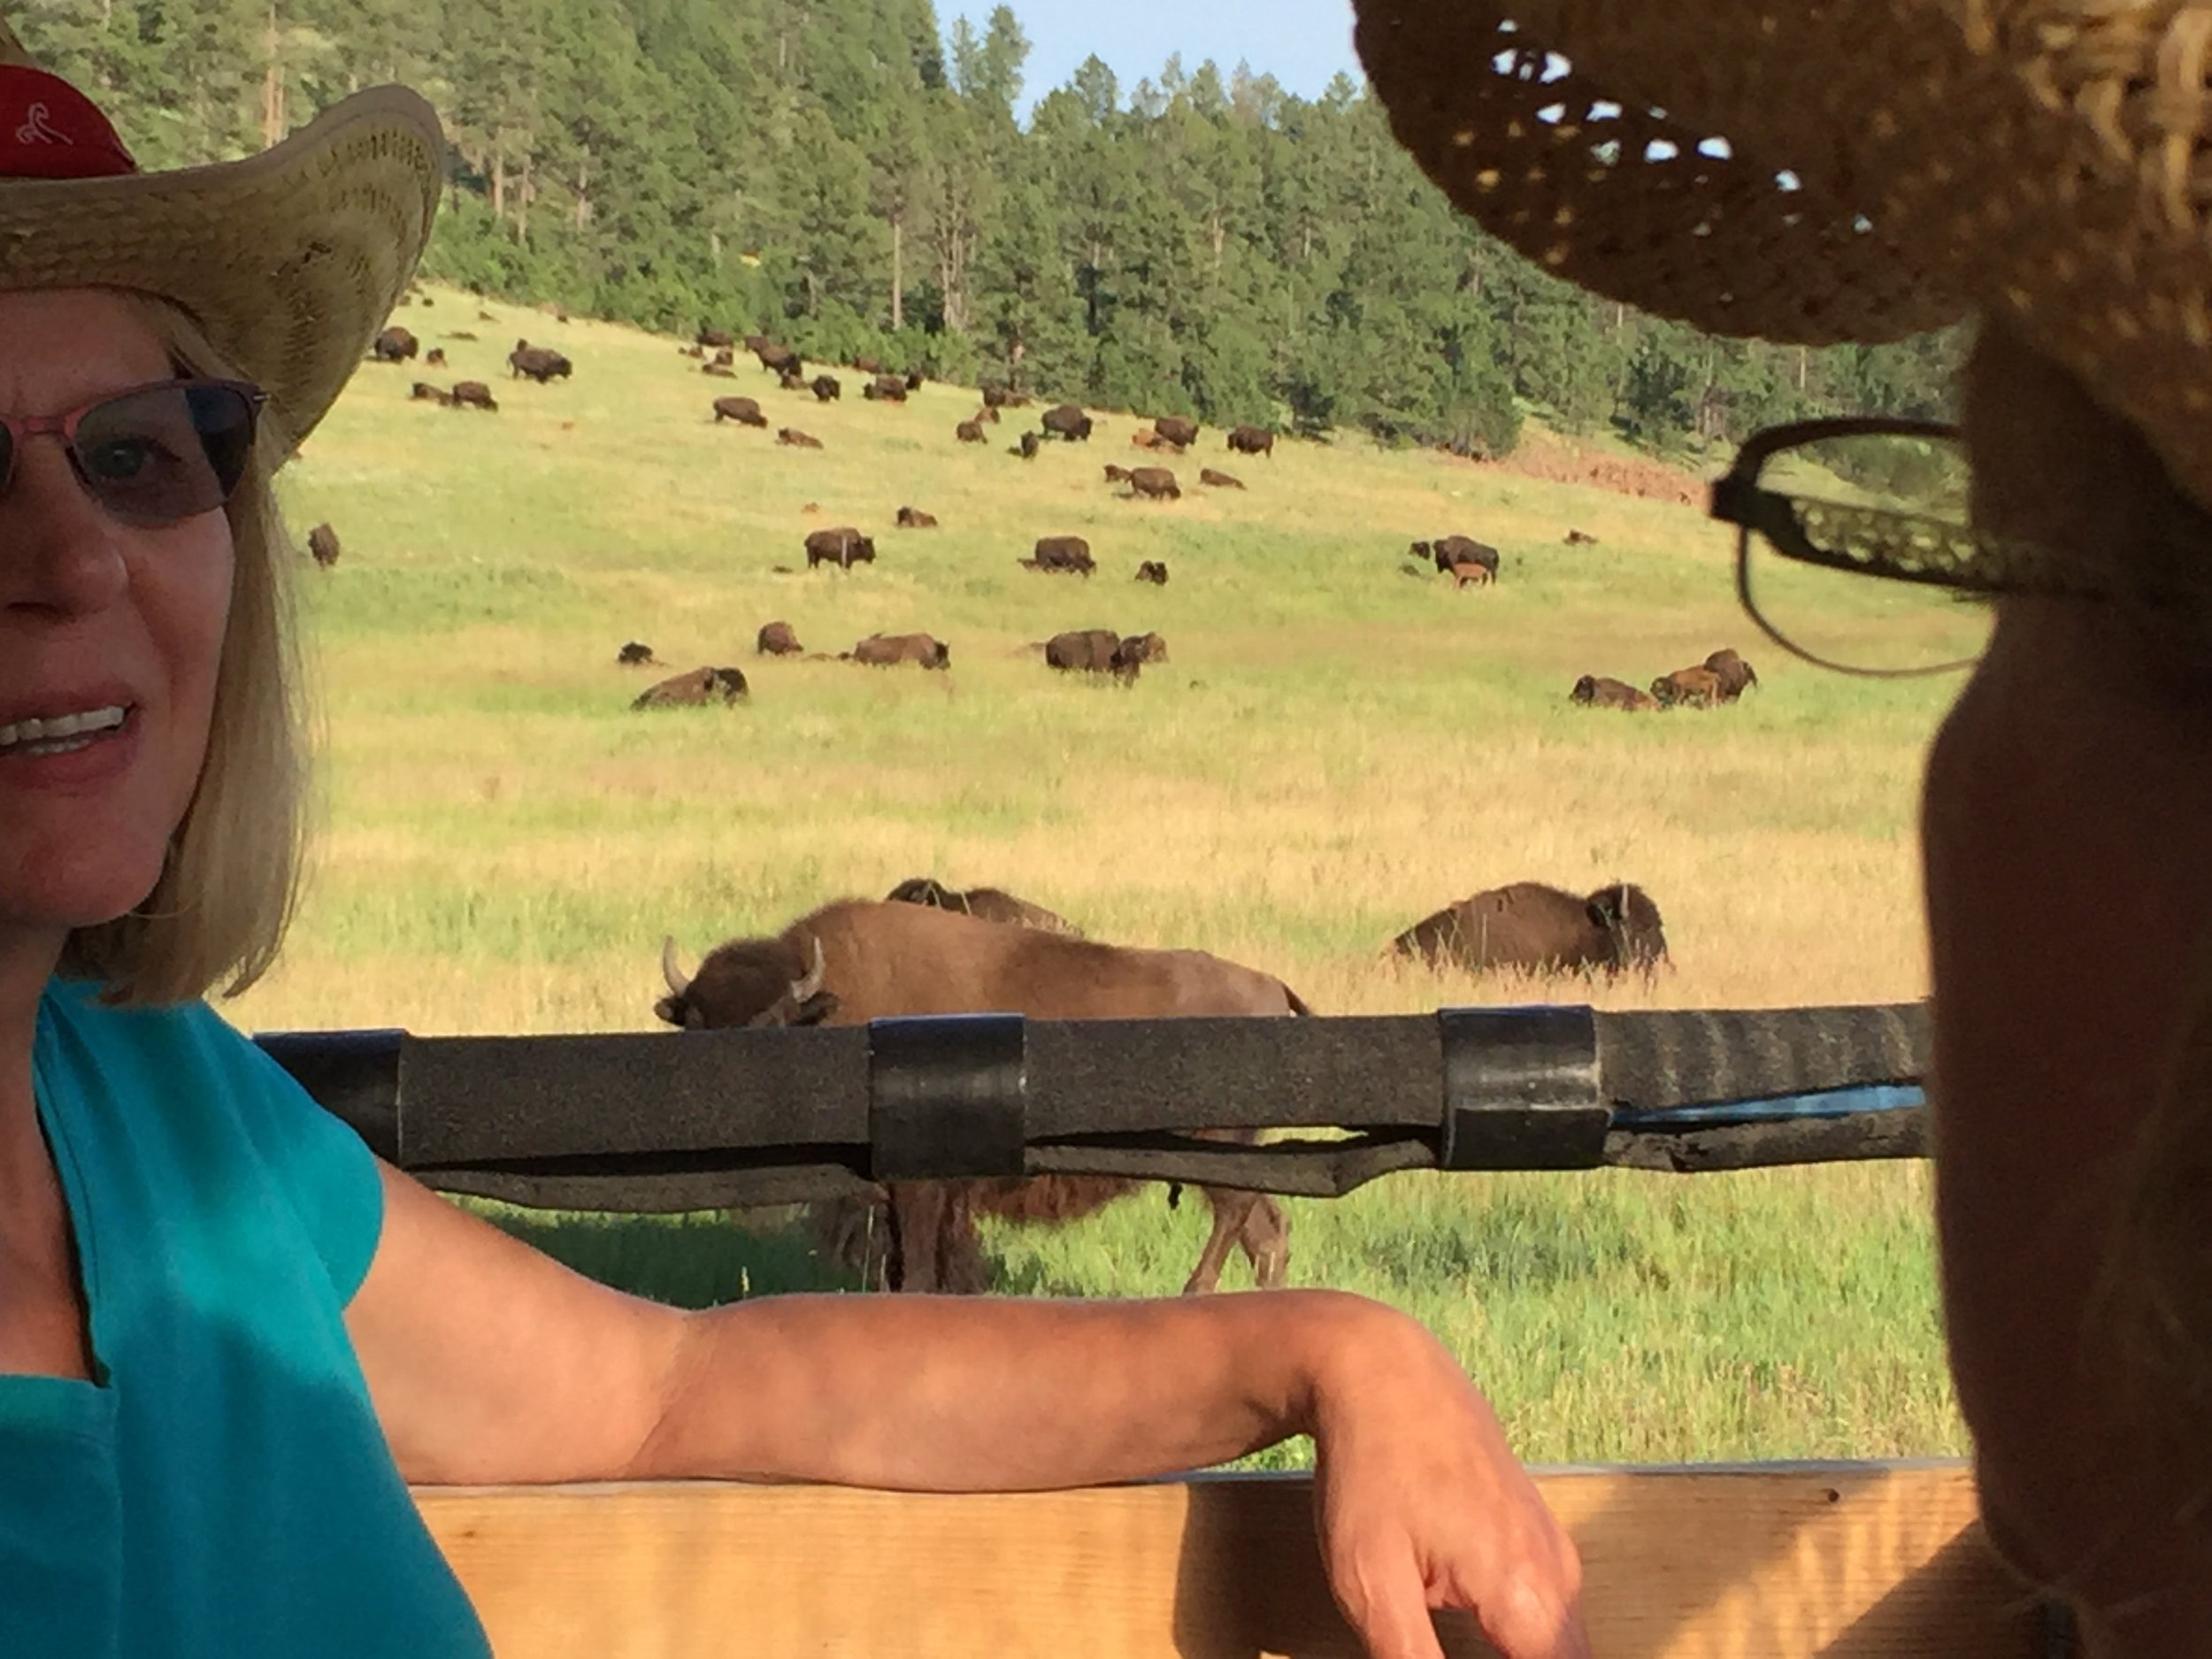  One of the coolest things the girls got to experience in South Dakota was the Chuck-wagon Hayride that Pappa took us on. We were lucky enough to get to experience an entire herd of Buffalo on the way to and from dinner that evening. What a sight!! 